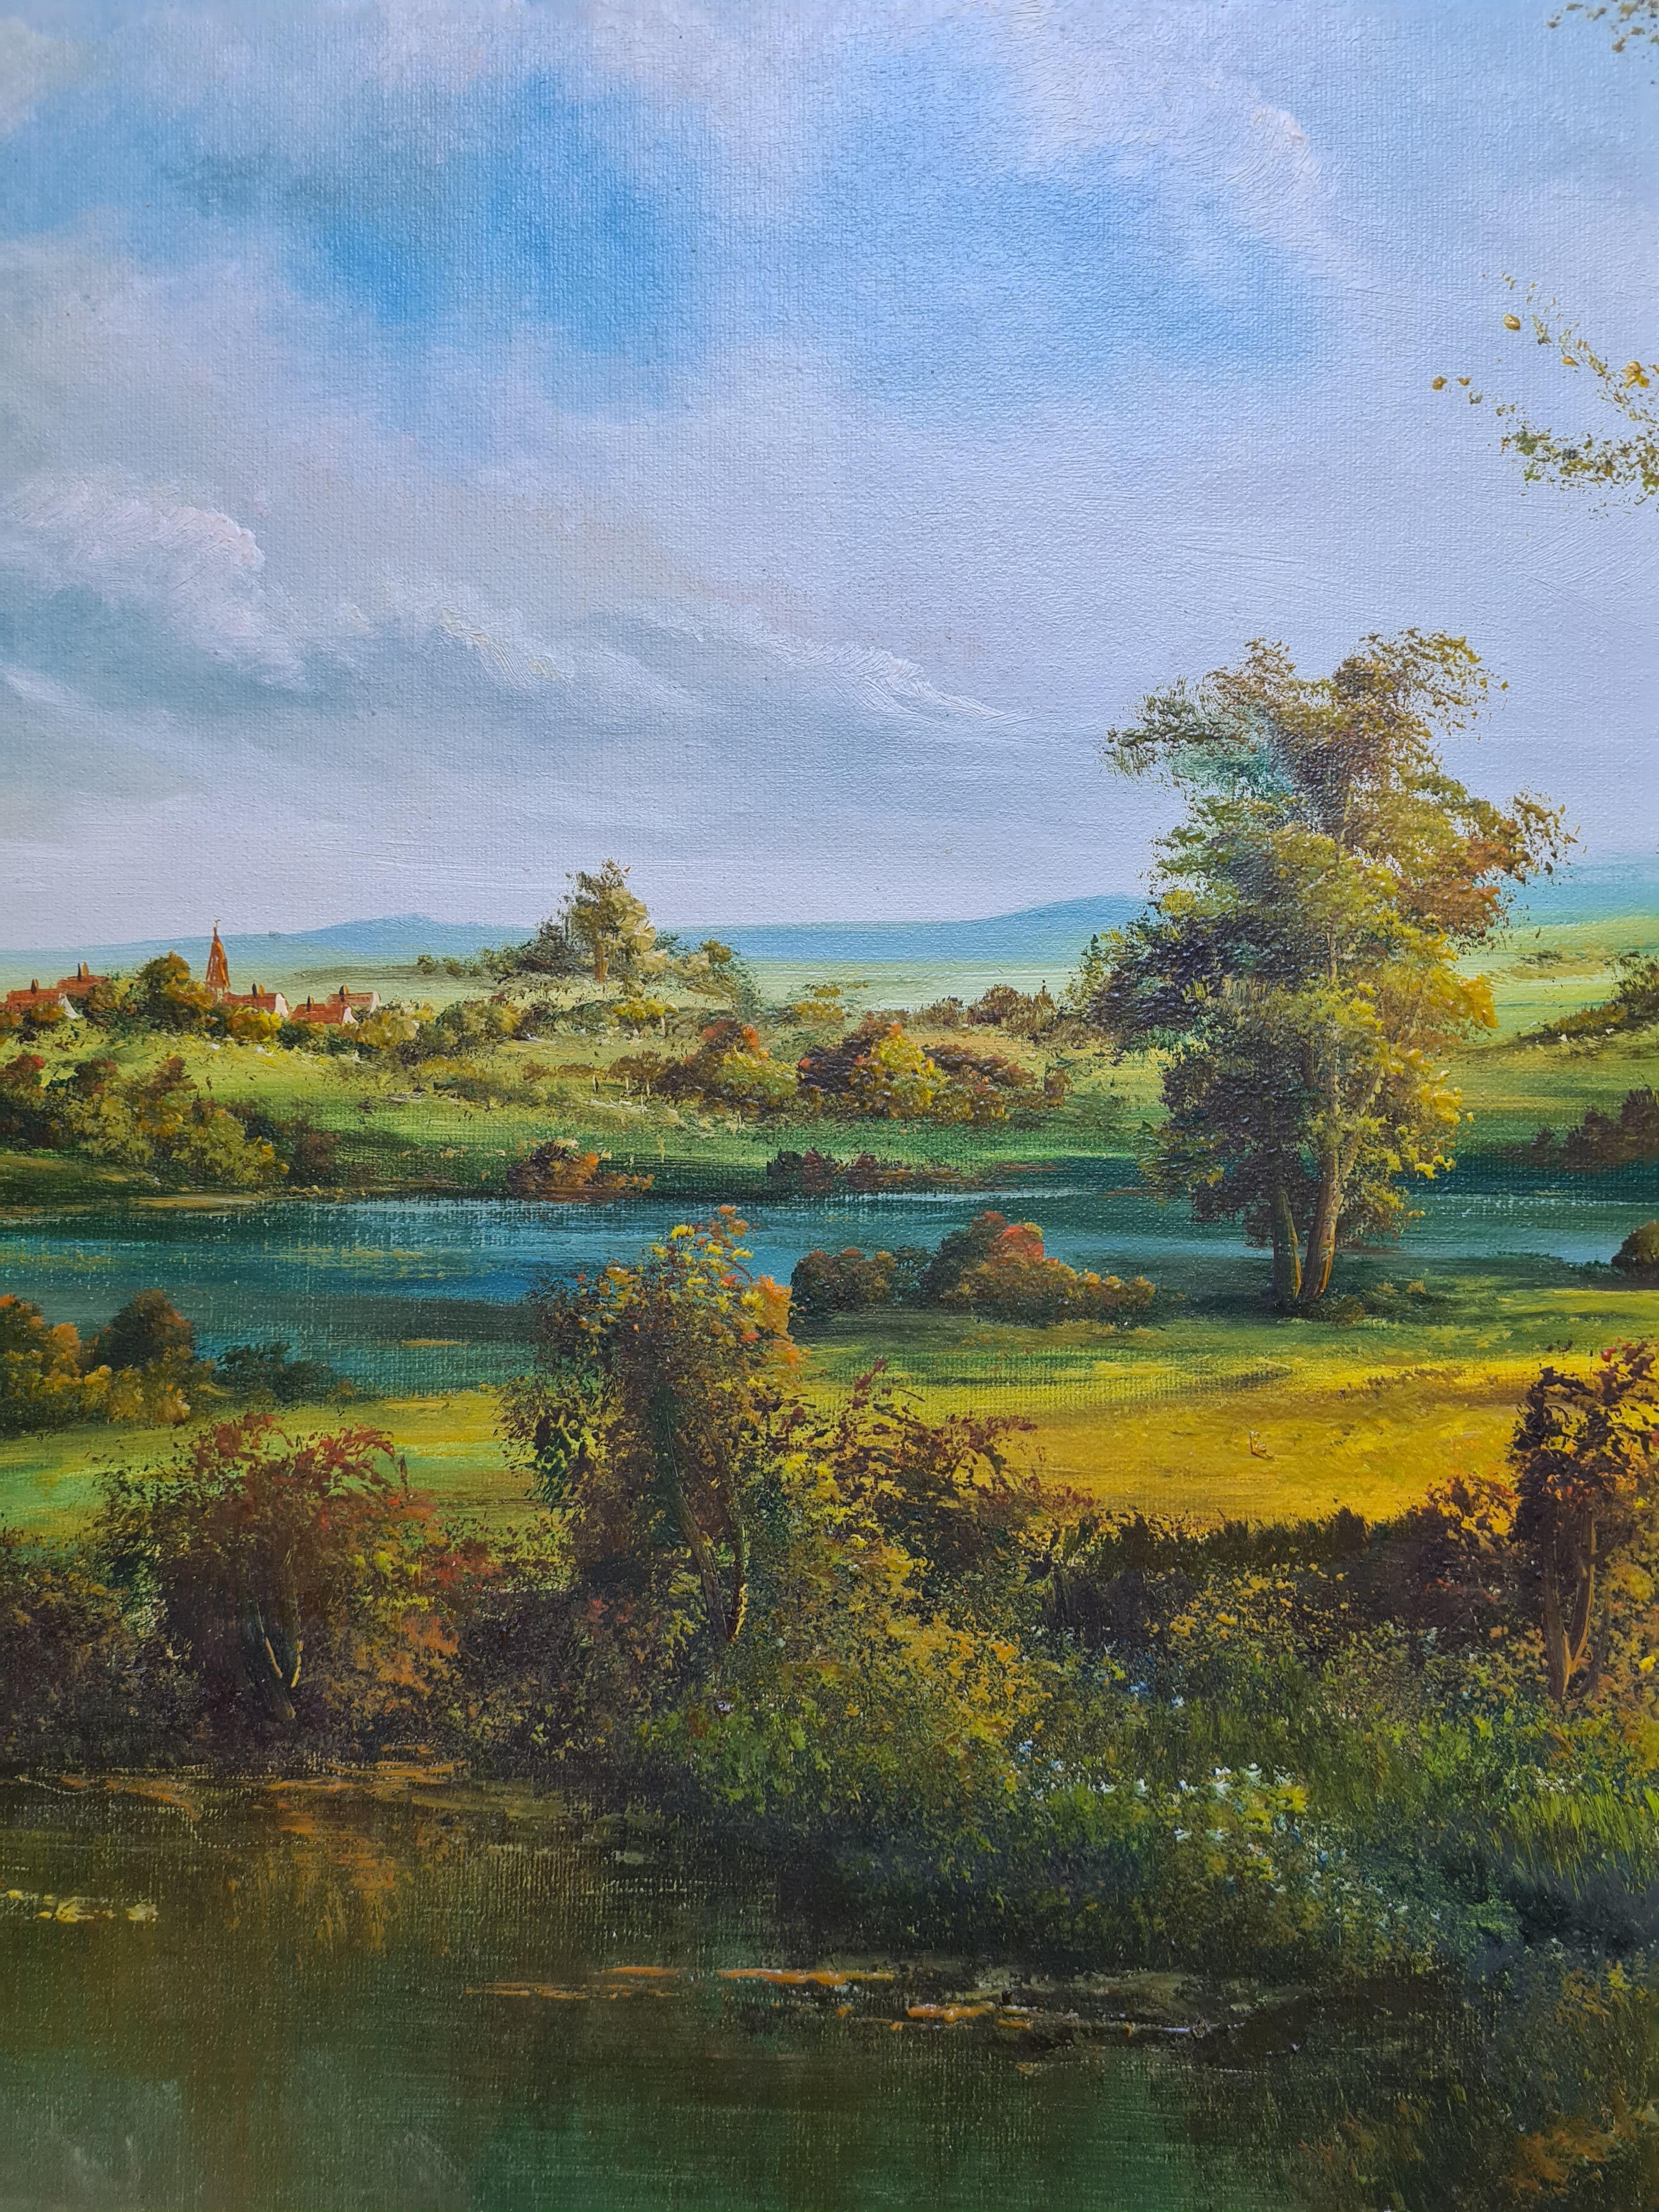 The Cottage, A Rural Idyll, Large Scale French Country Landscape. Oil on Canvas. For Sale 1